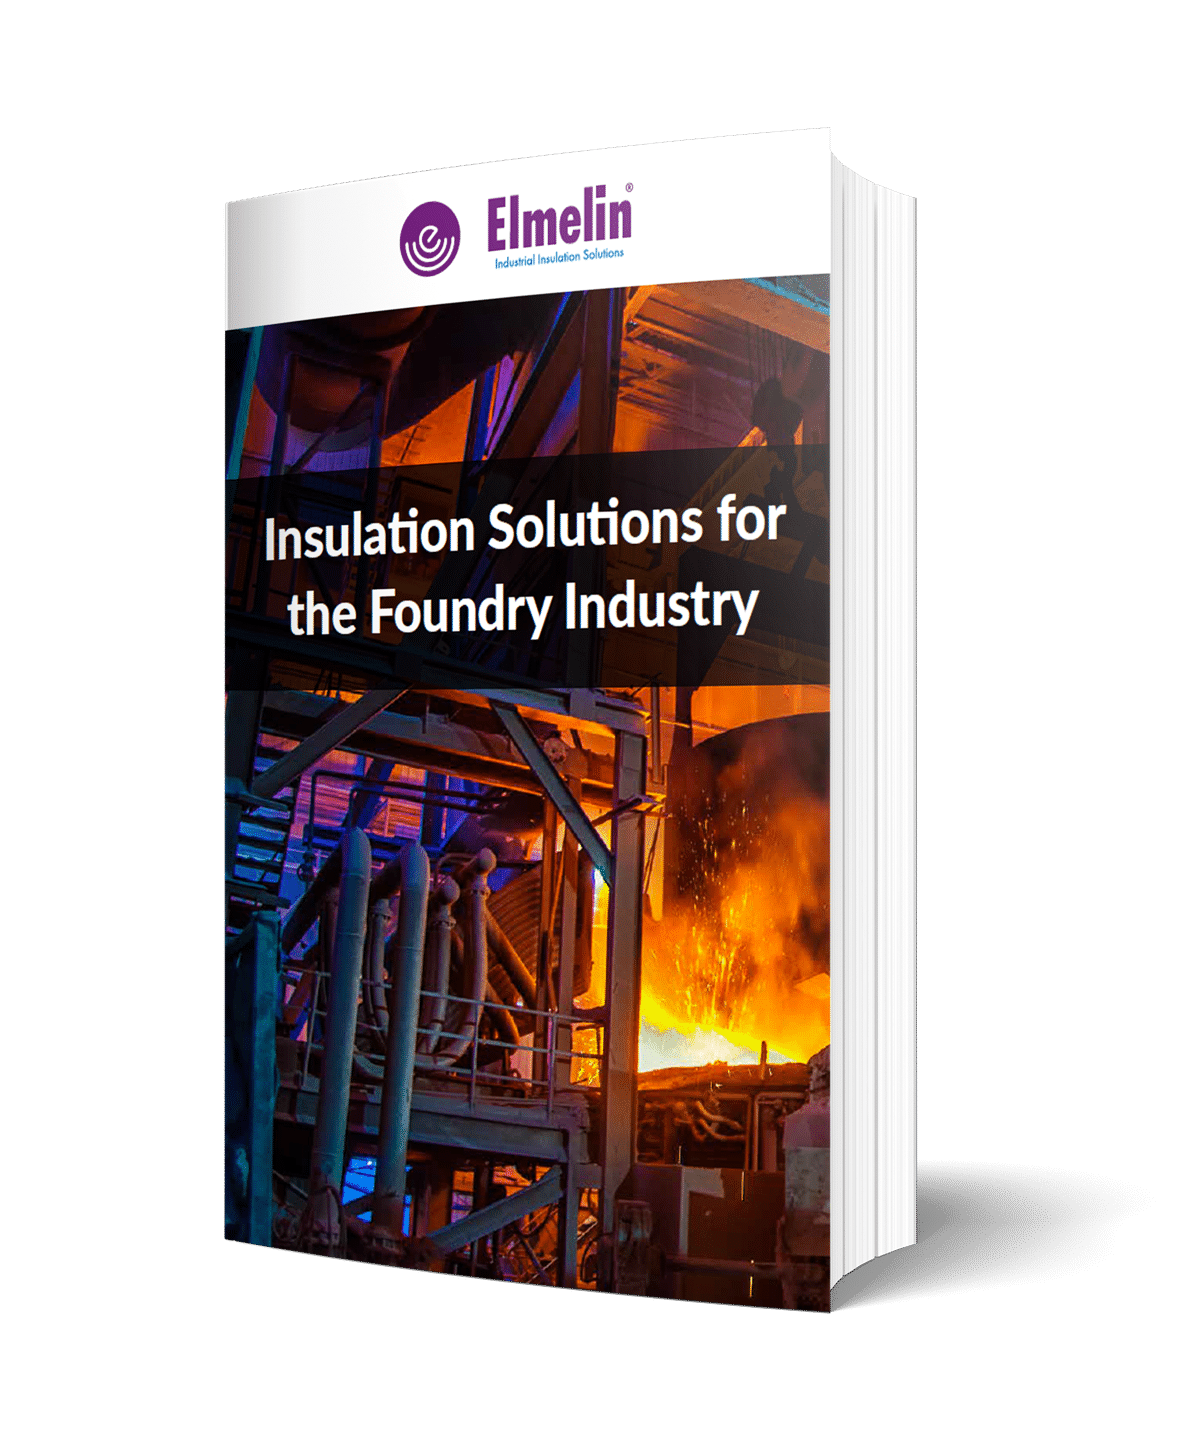 Insulation Solutions for the Foundry Industry